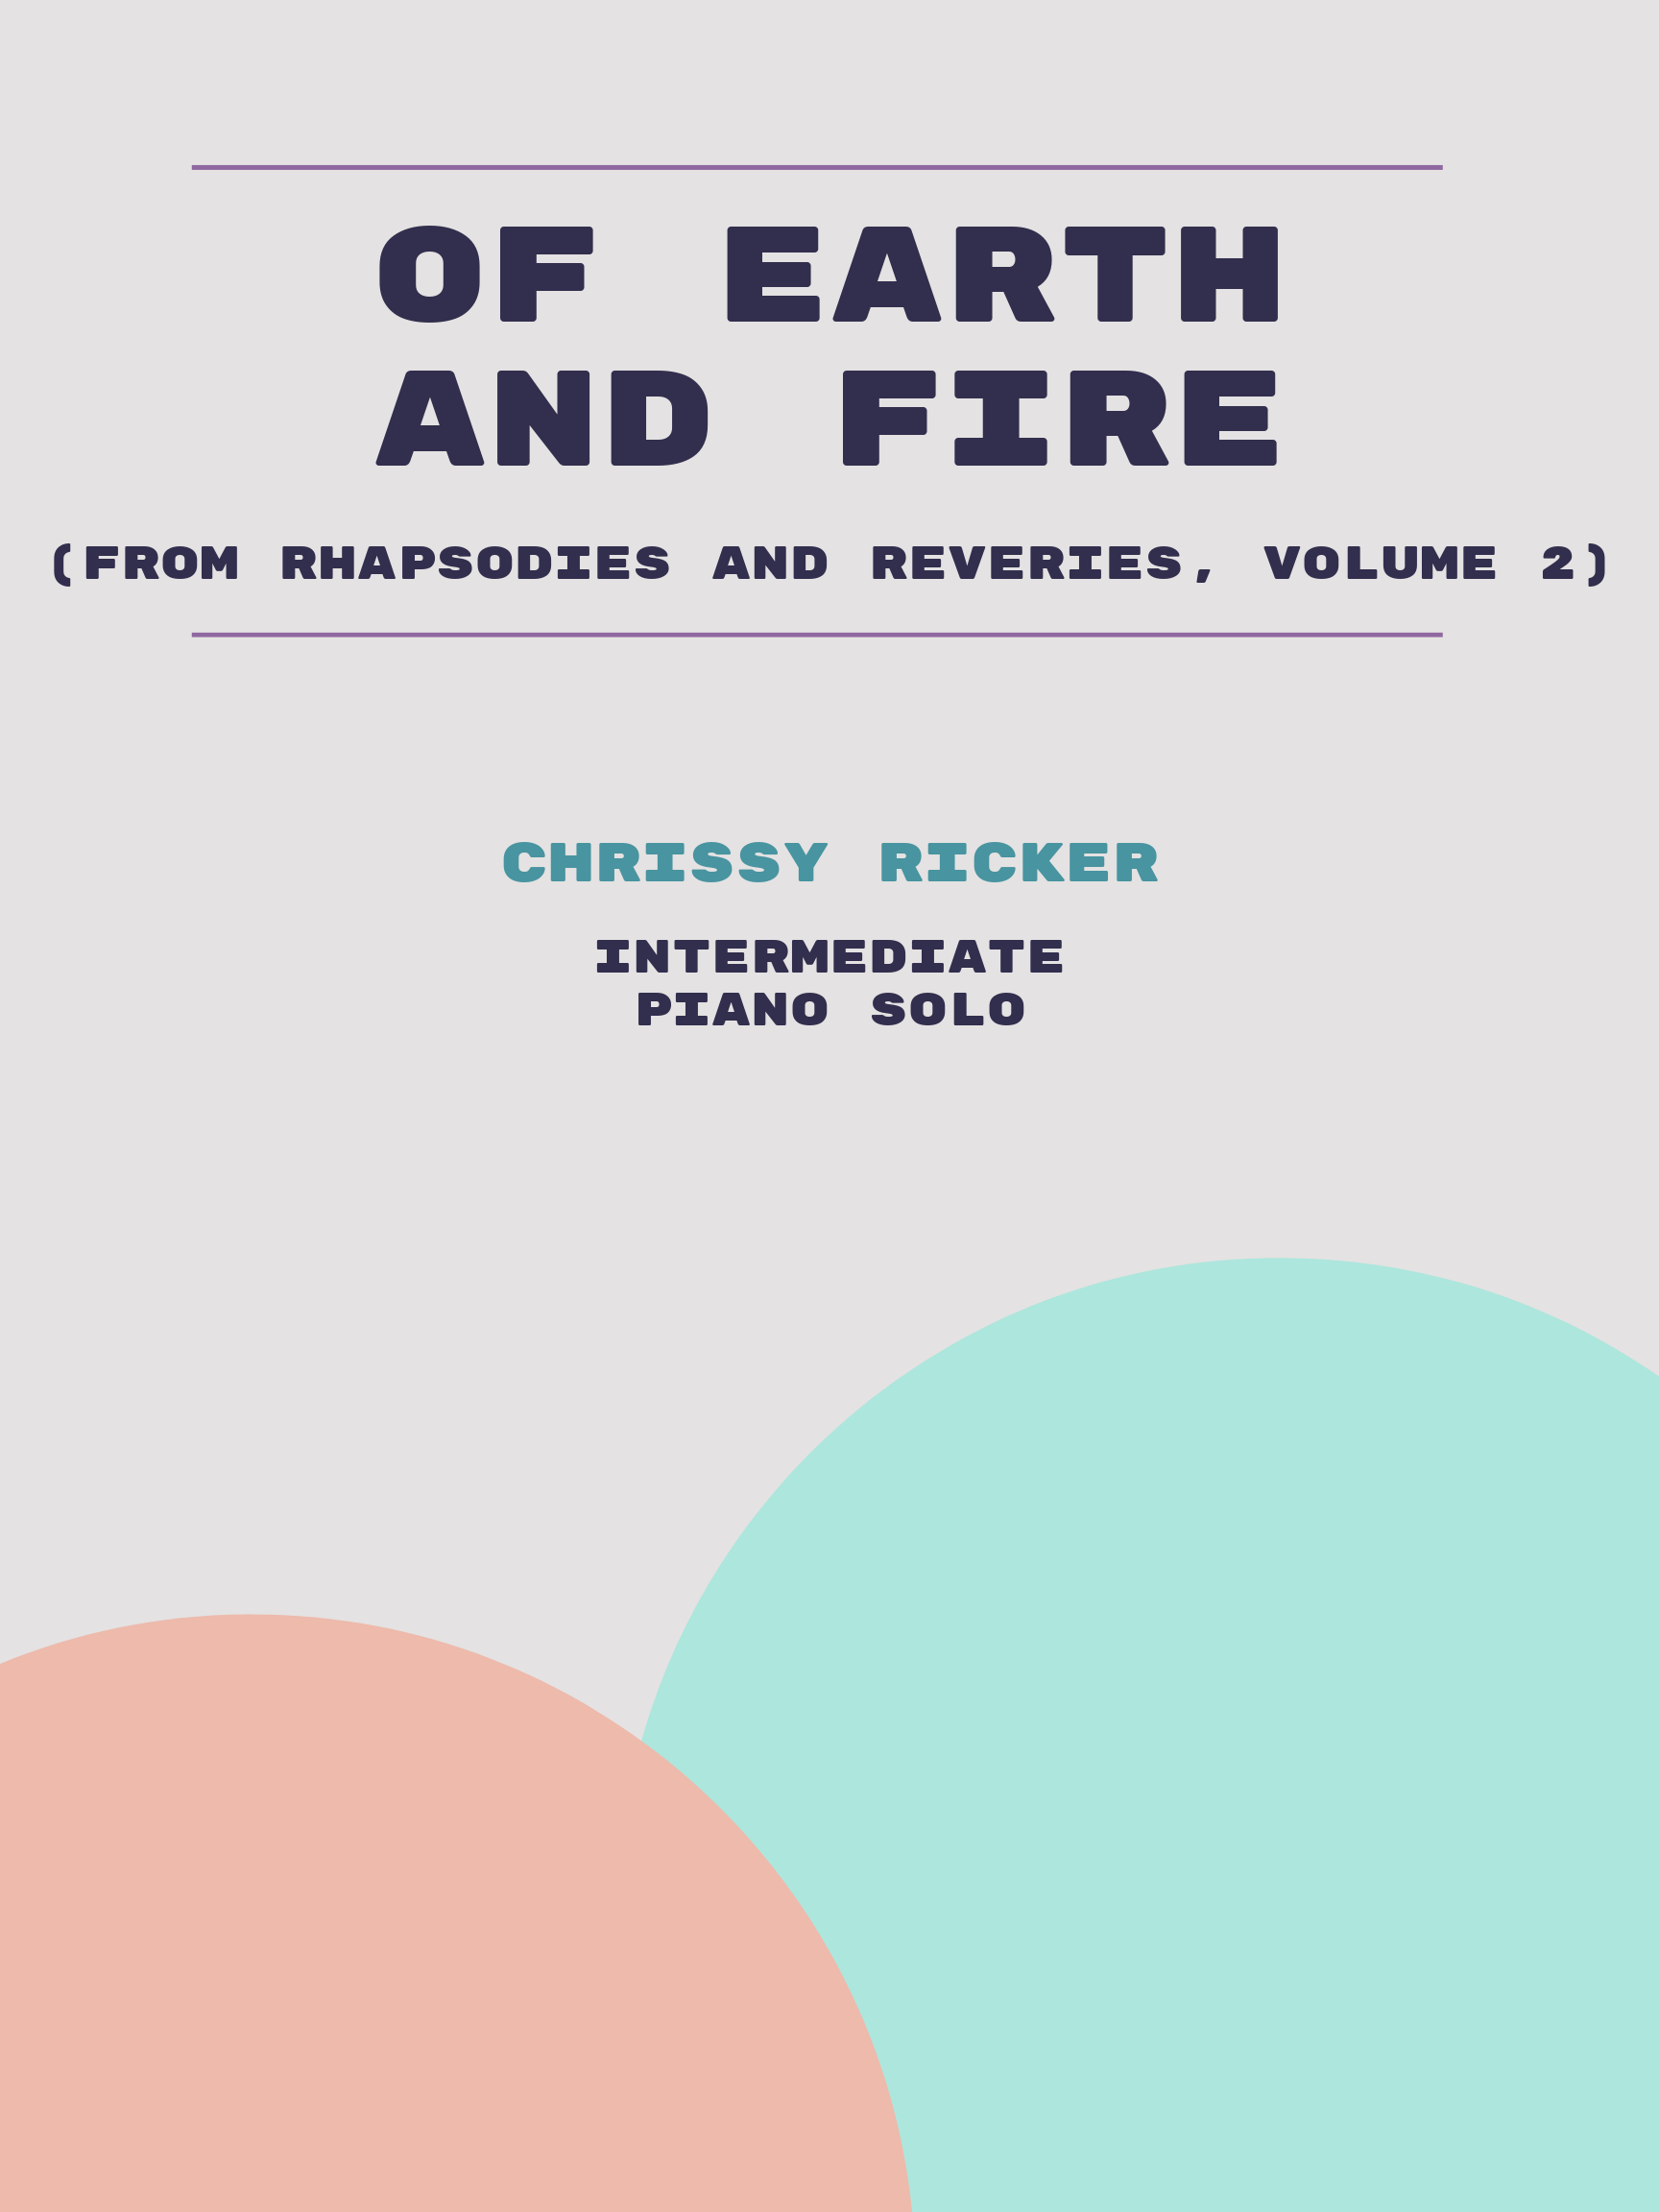 Of Earth and Fire by Chrissy Ricker